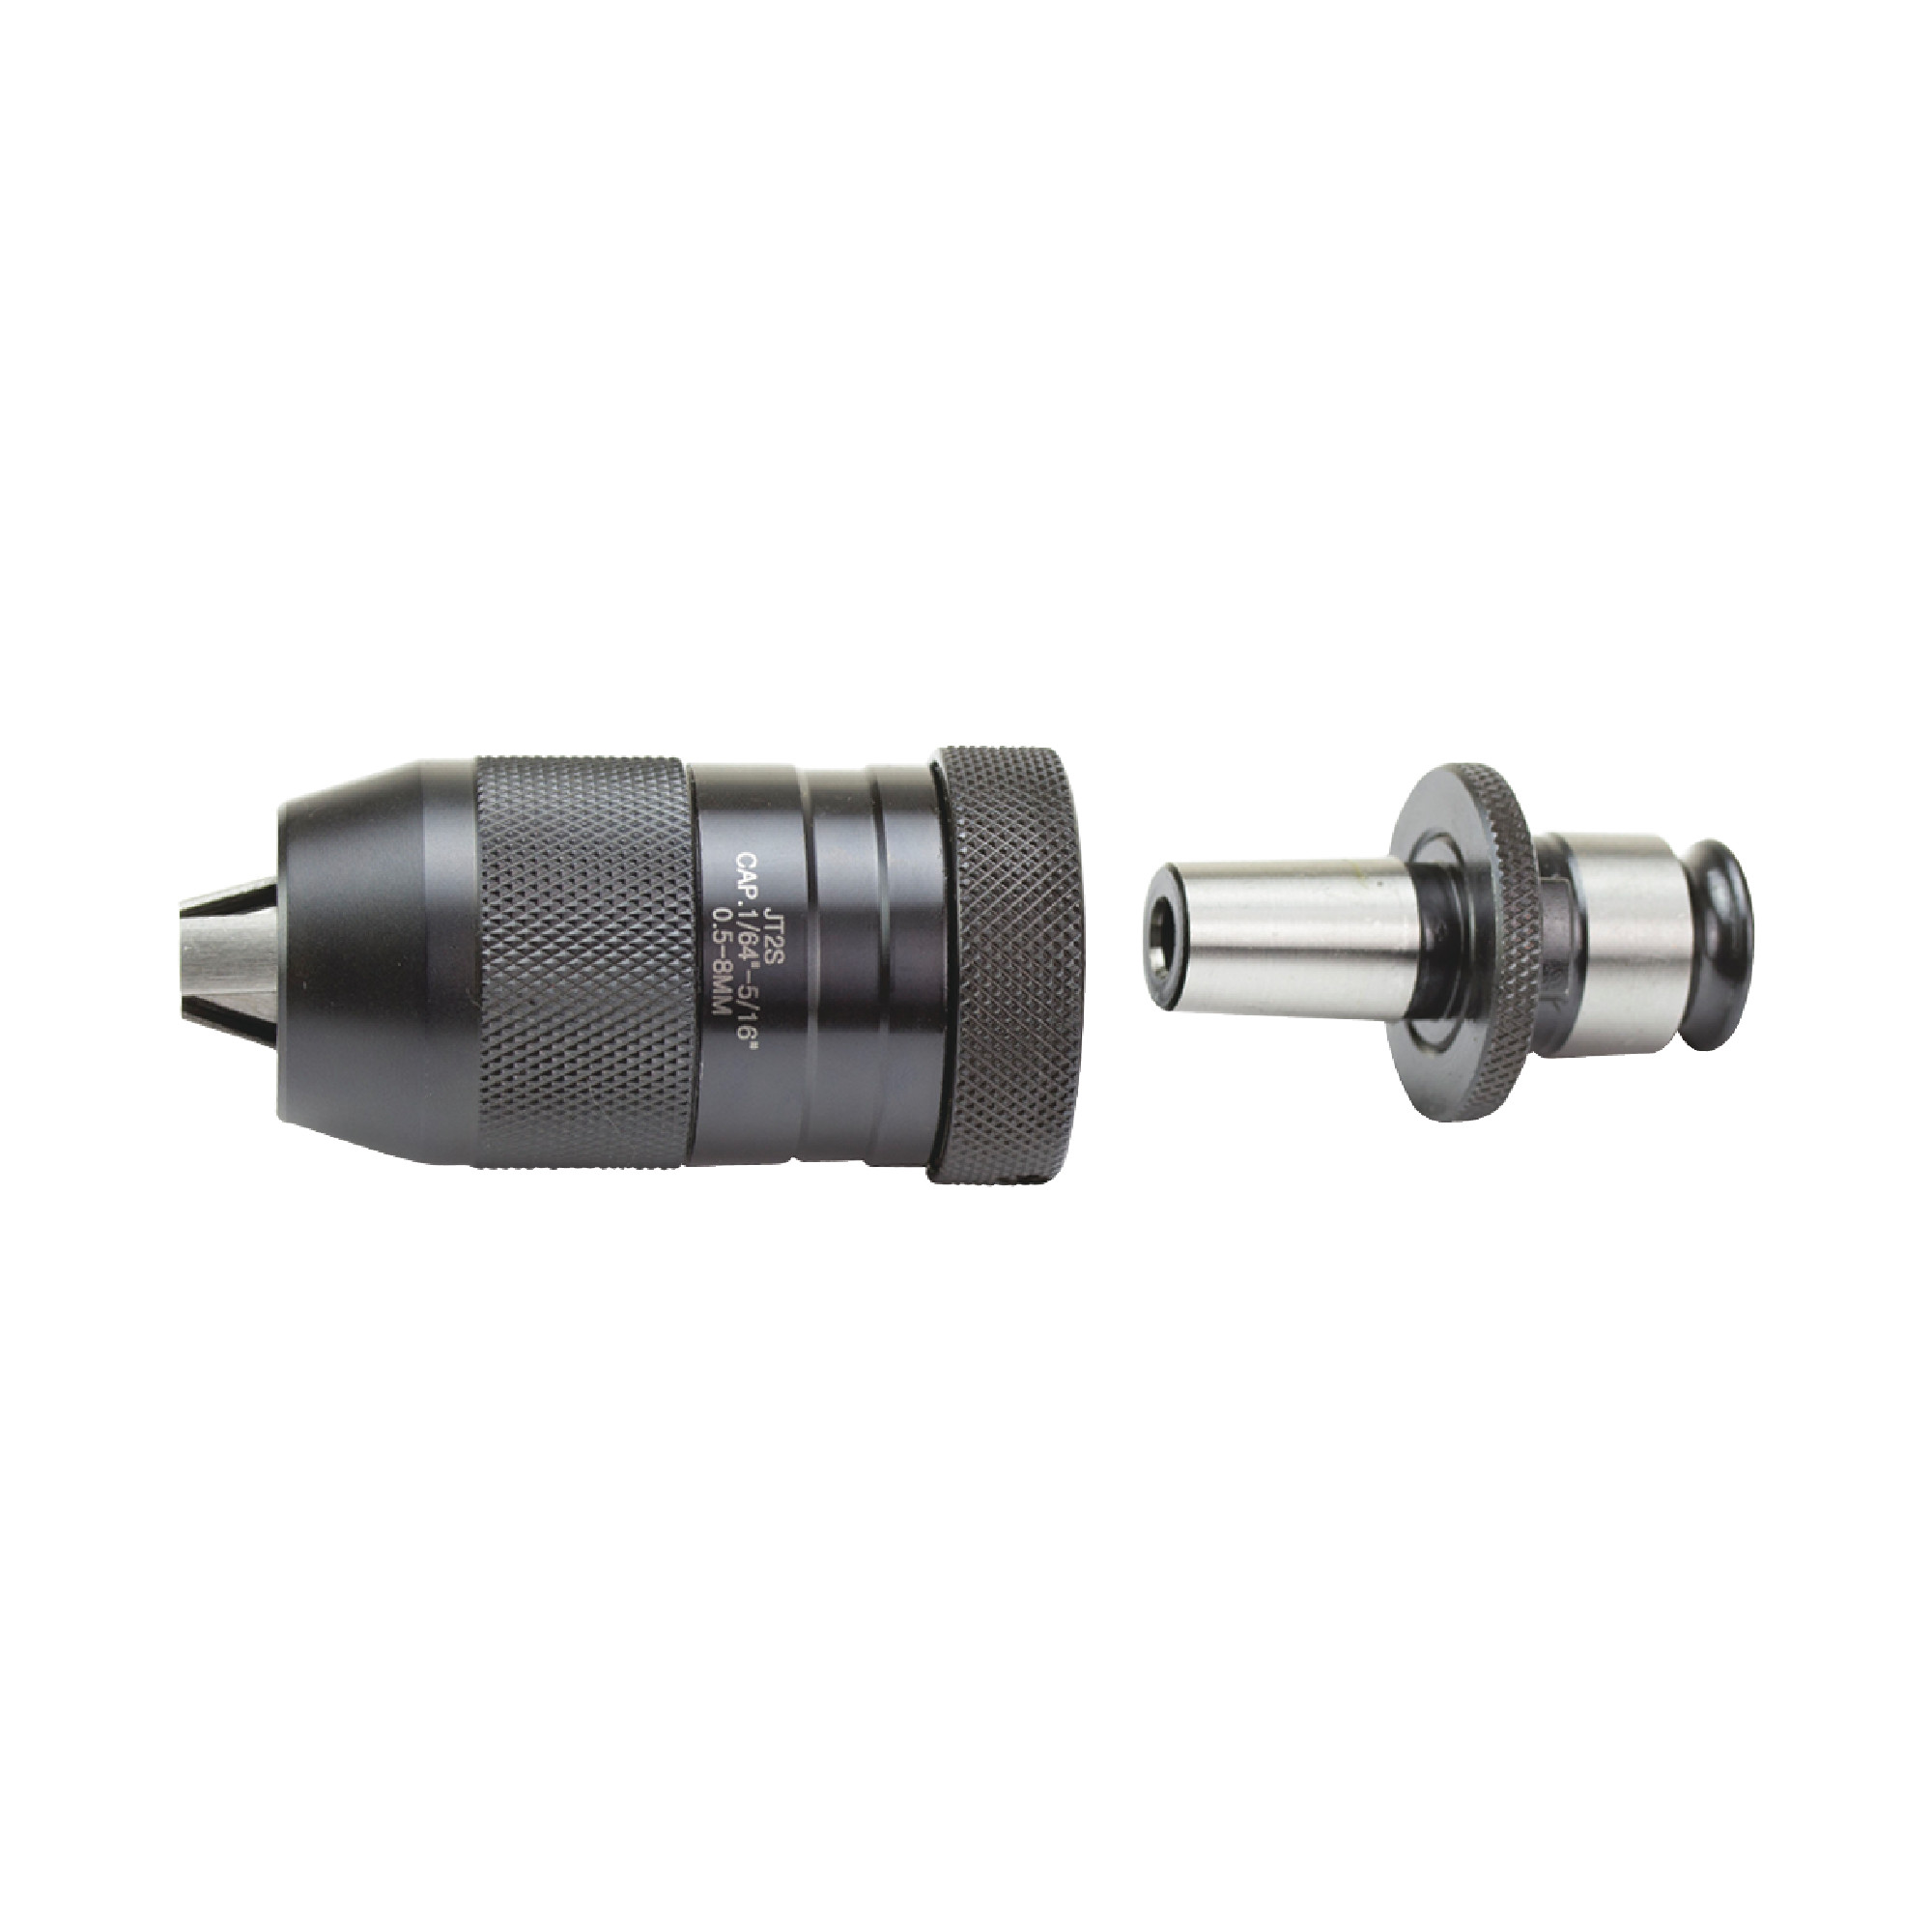 5/16" Drill Chuck On Size 1 Quick Change Adaptor